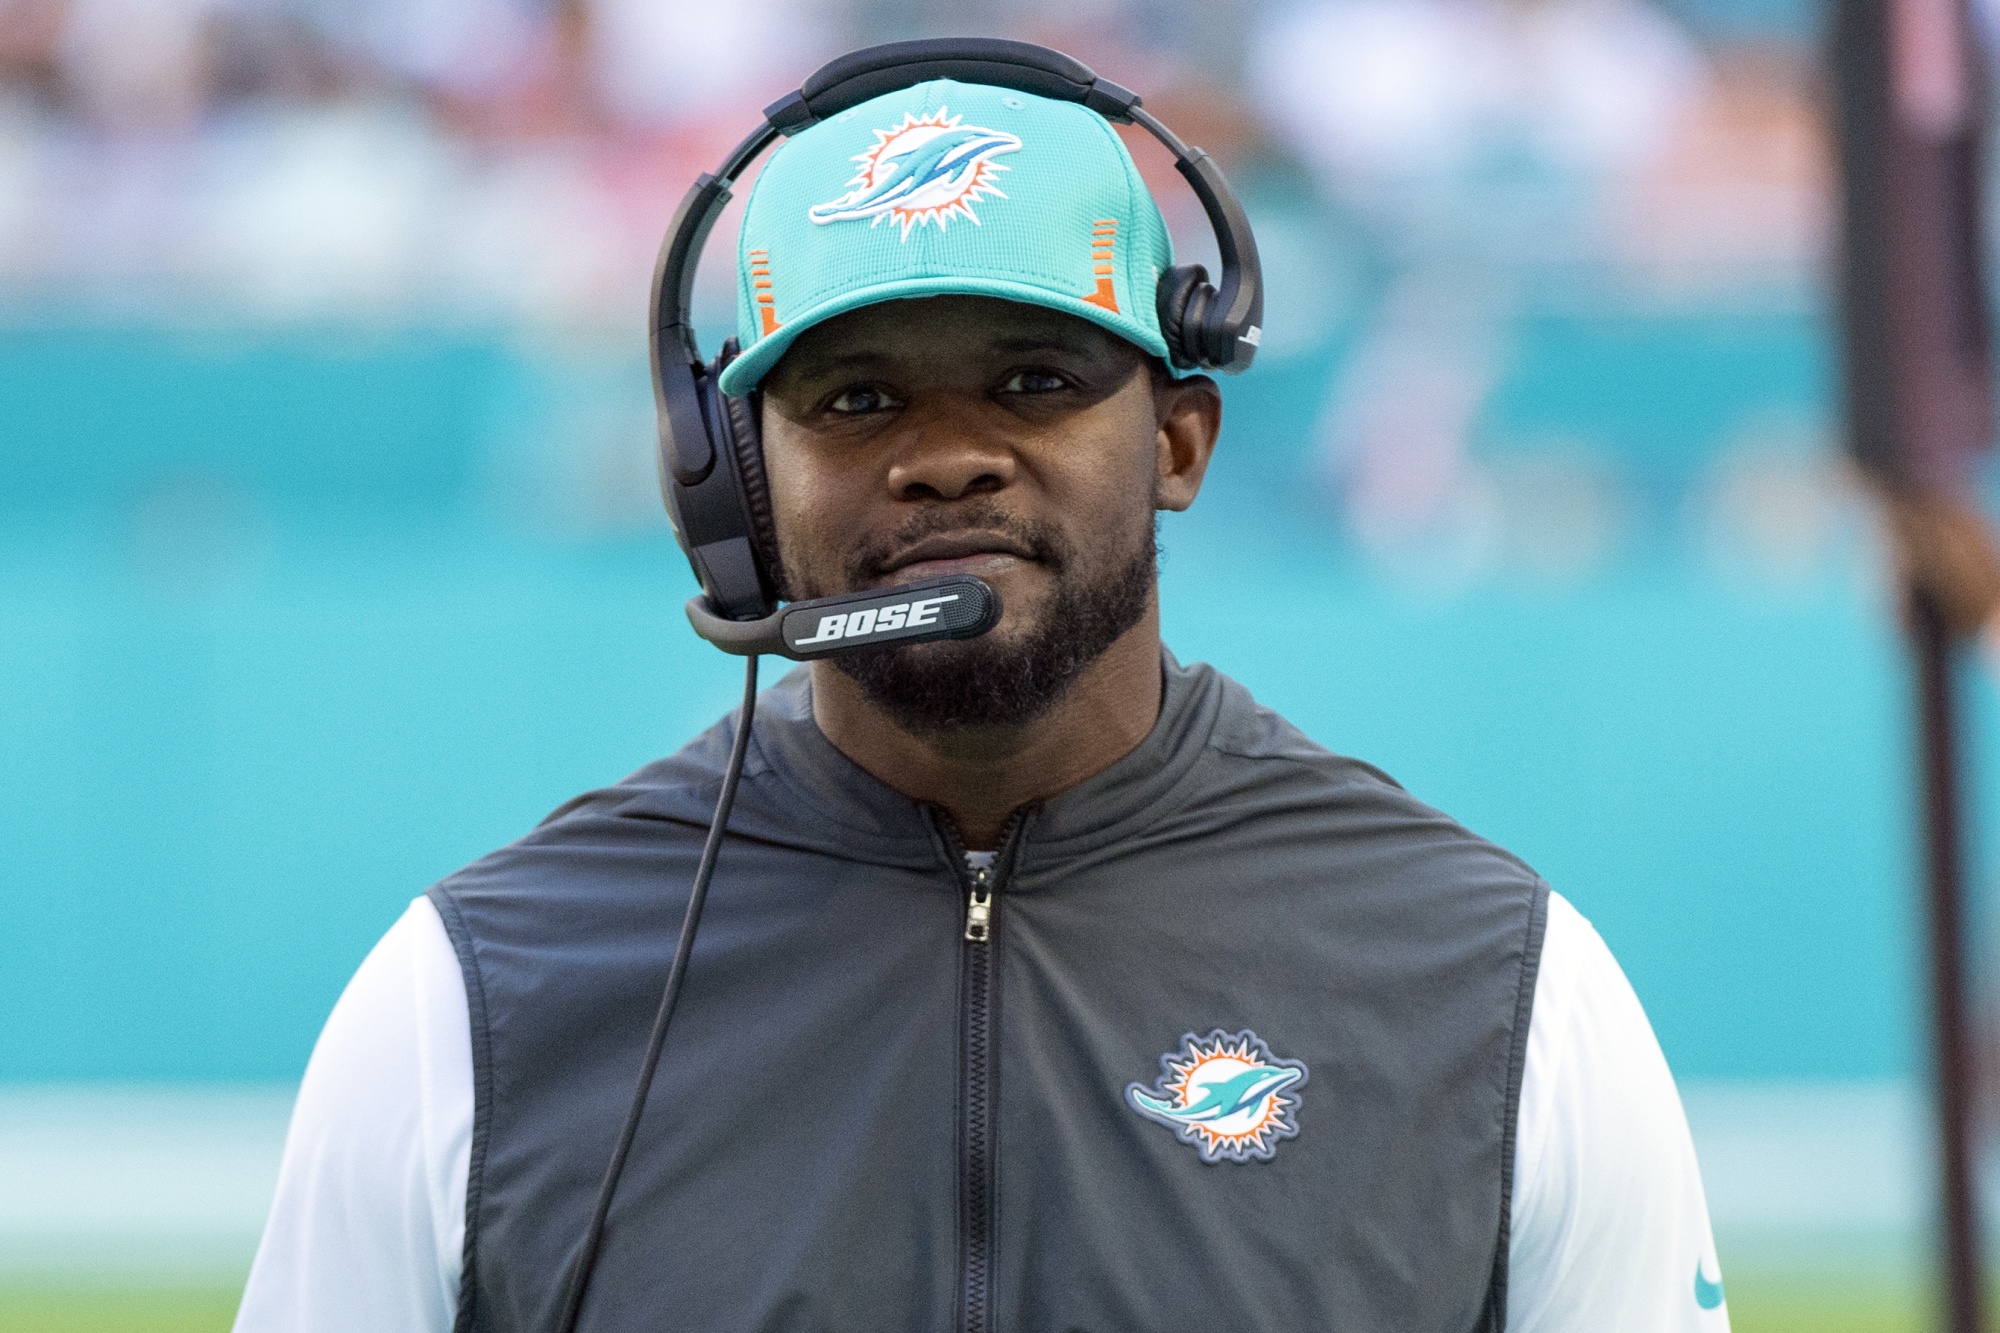 Former Dolphins Coach Flores: Race Played a Factor in Firing - Bloomberg